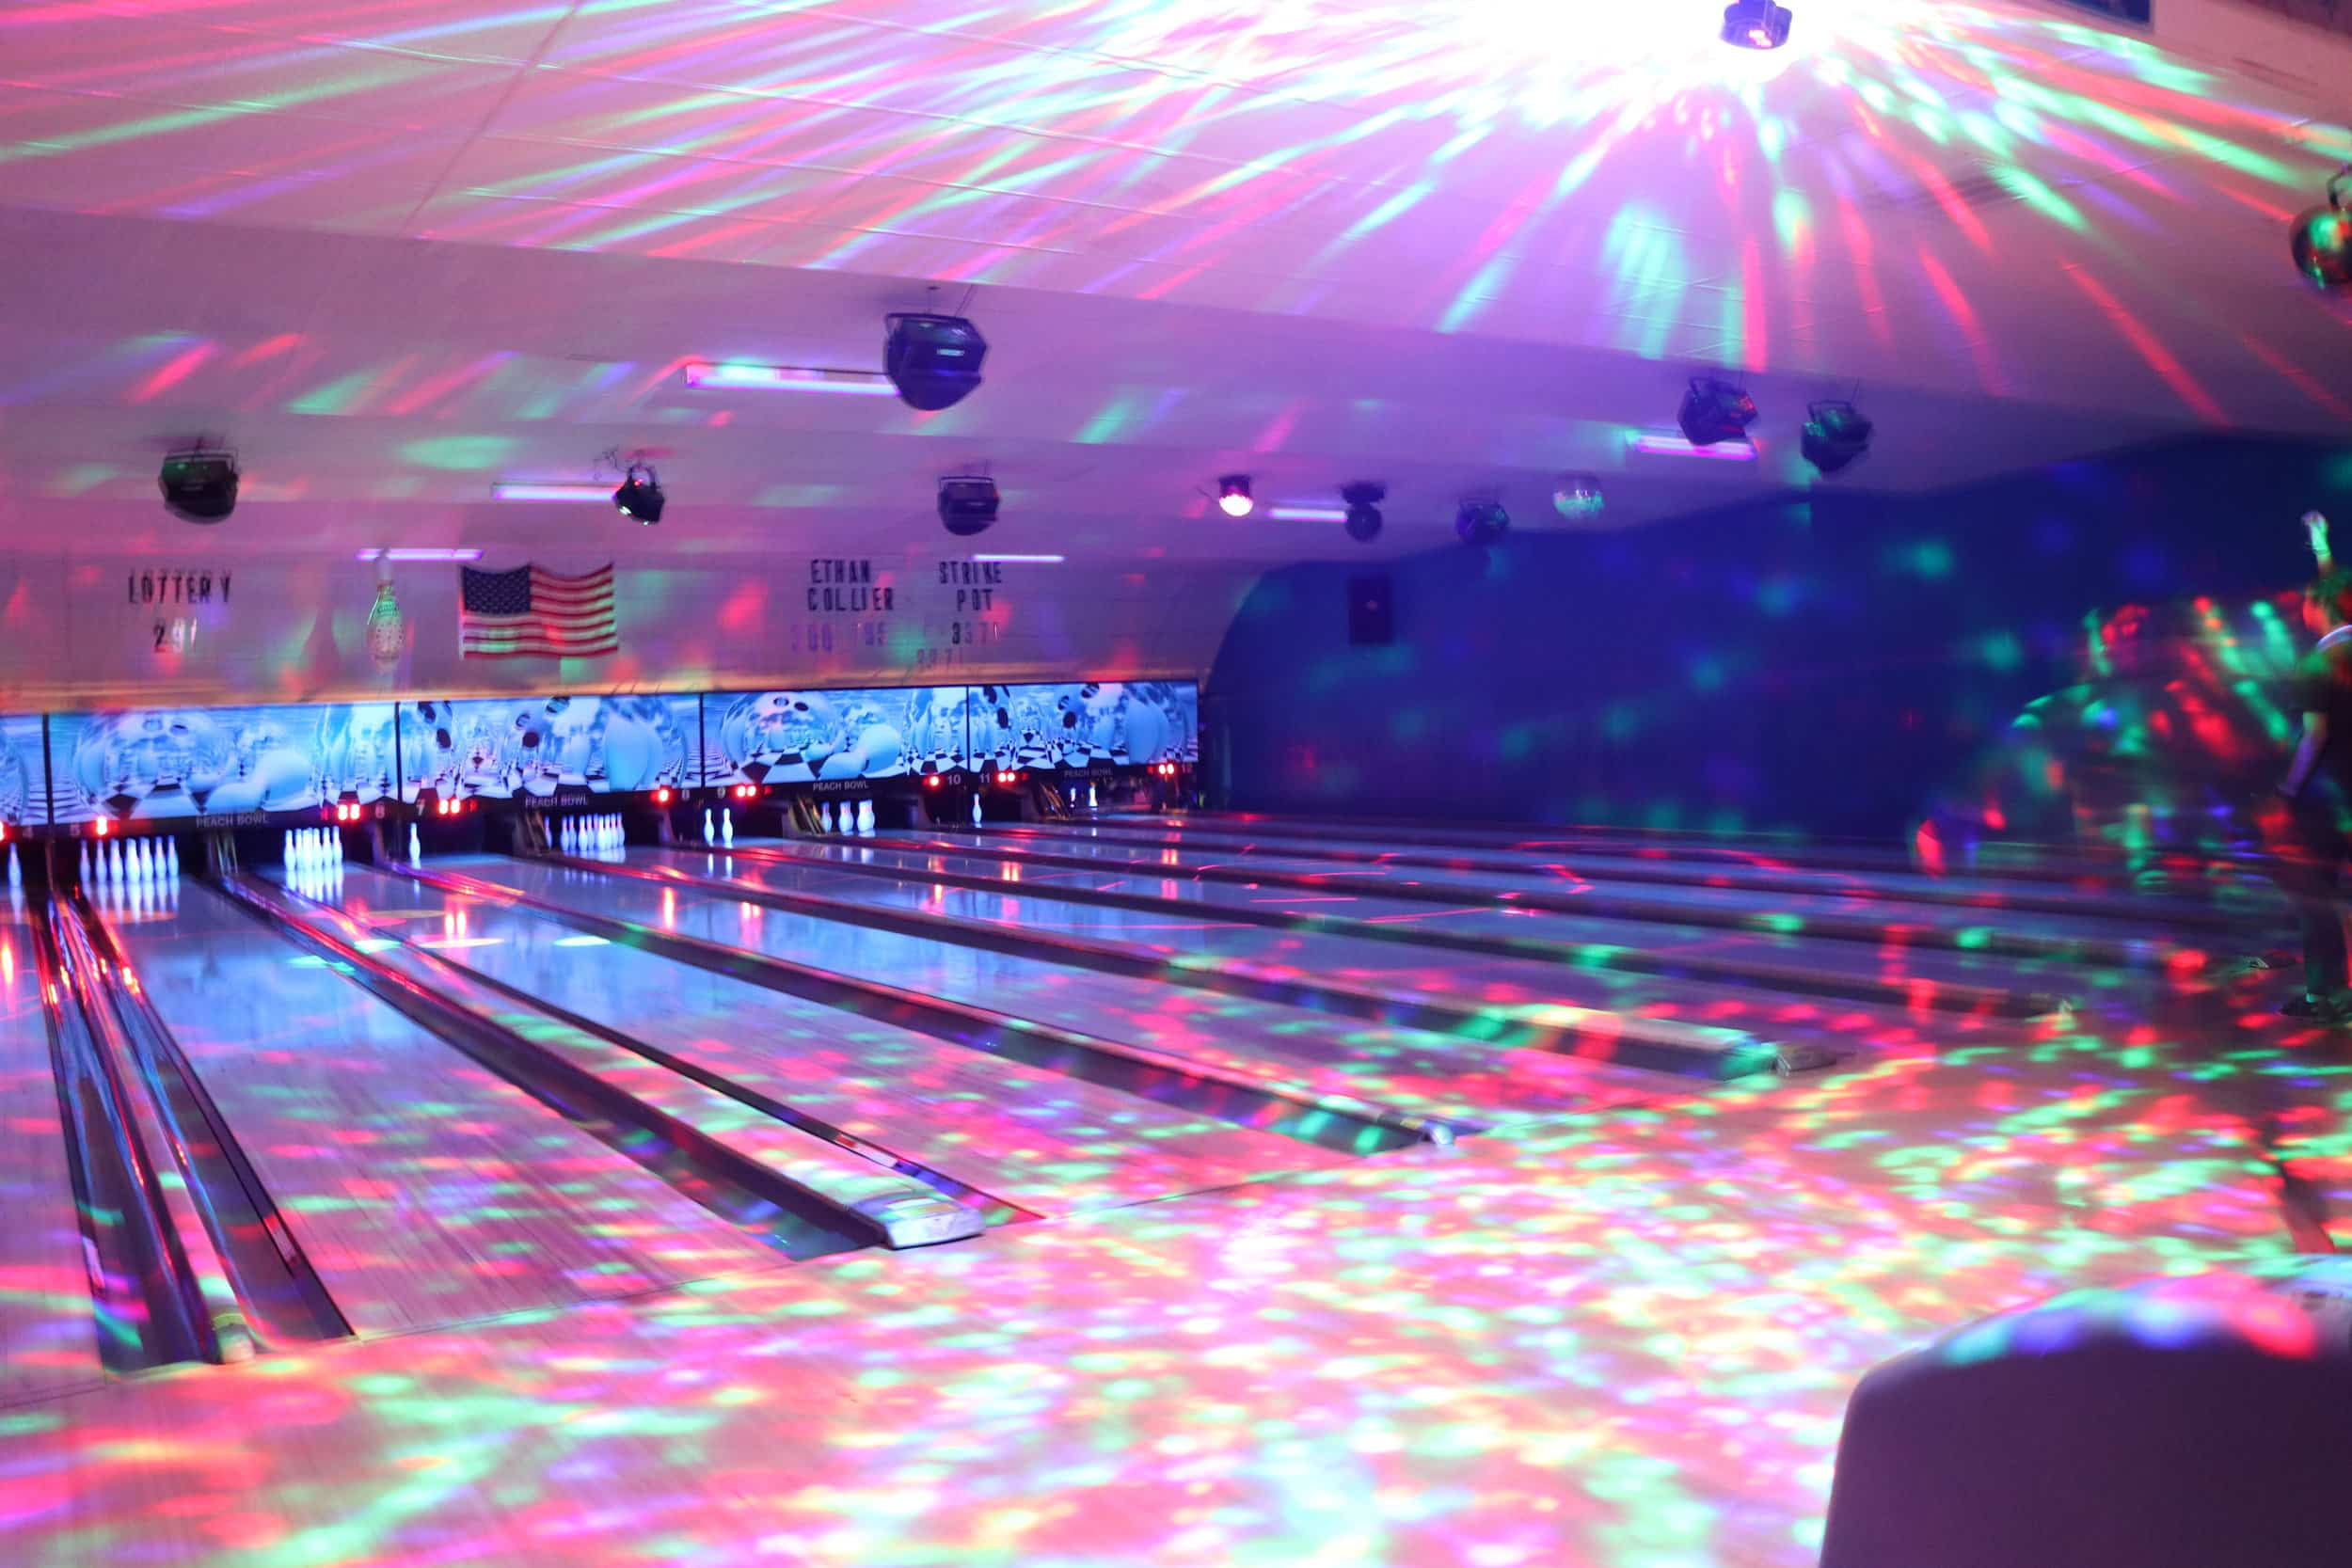 The lights went wild closer to midnight as bowling came to a close.